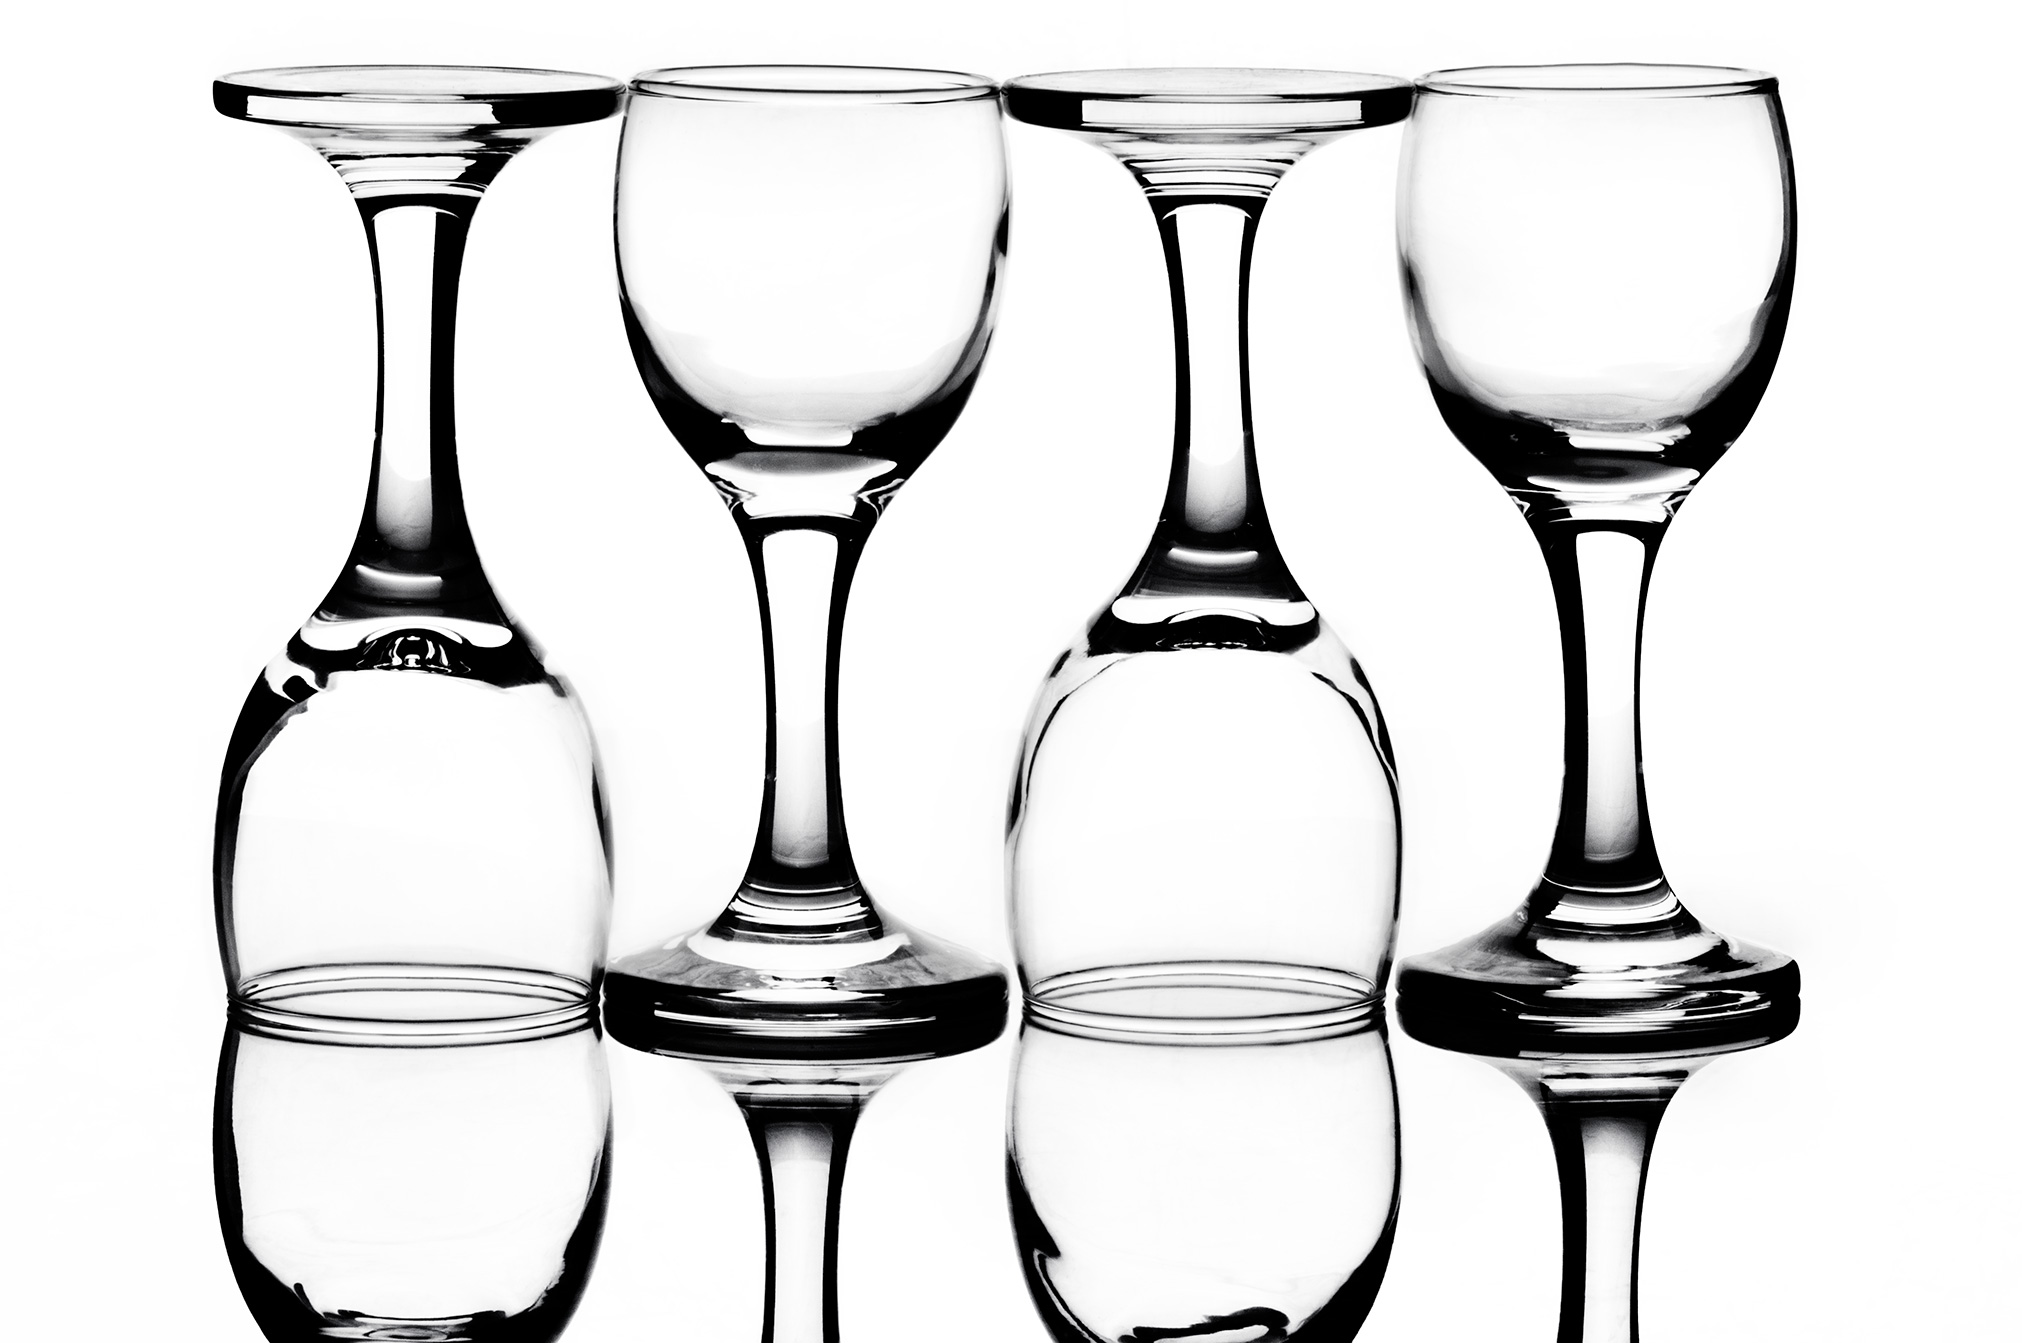 Landscape Photo, Set of Glassware photographed to show reflection on clear surface